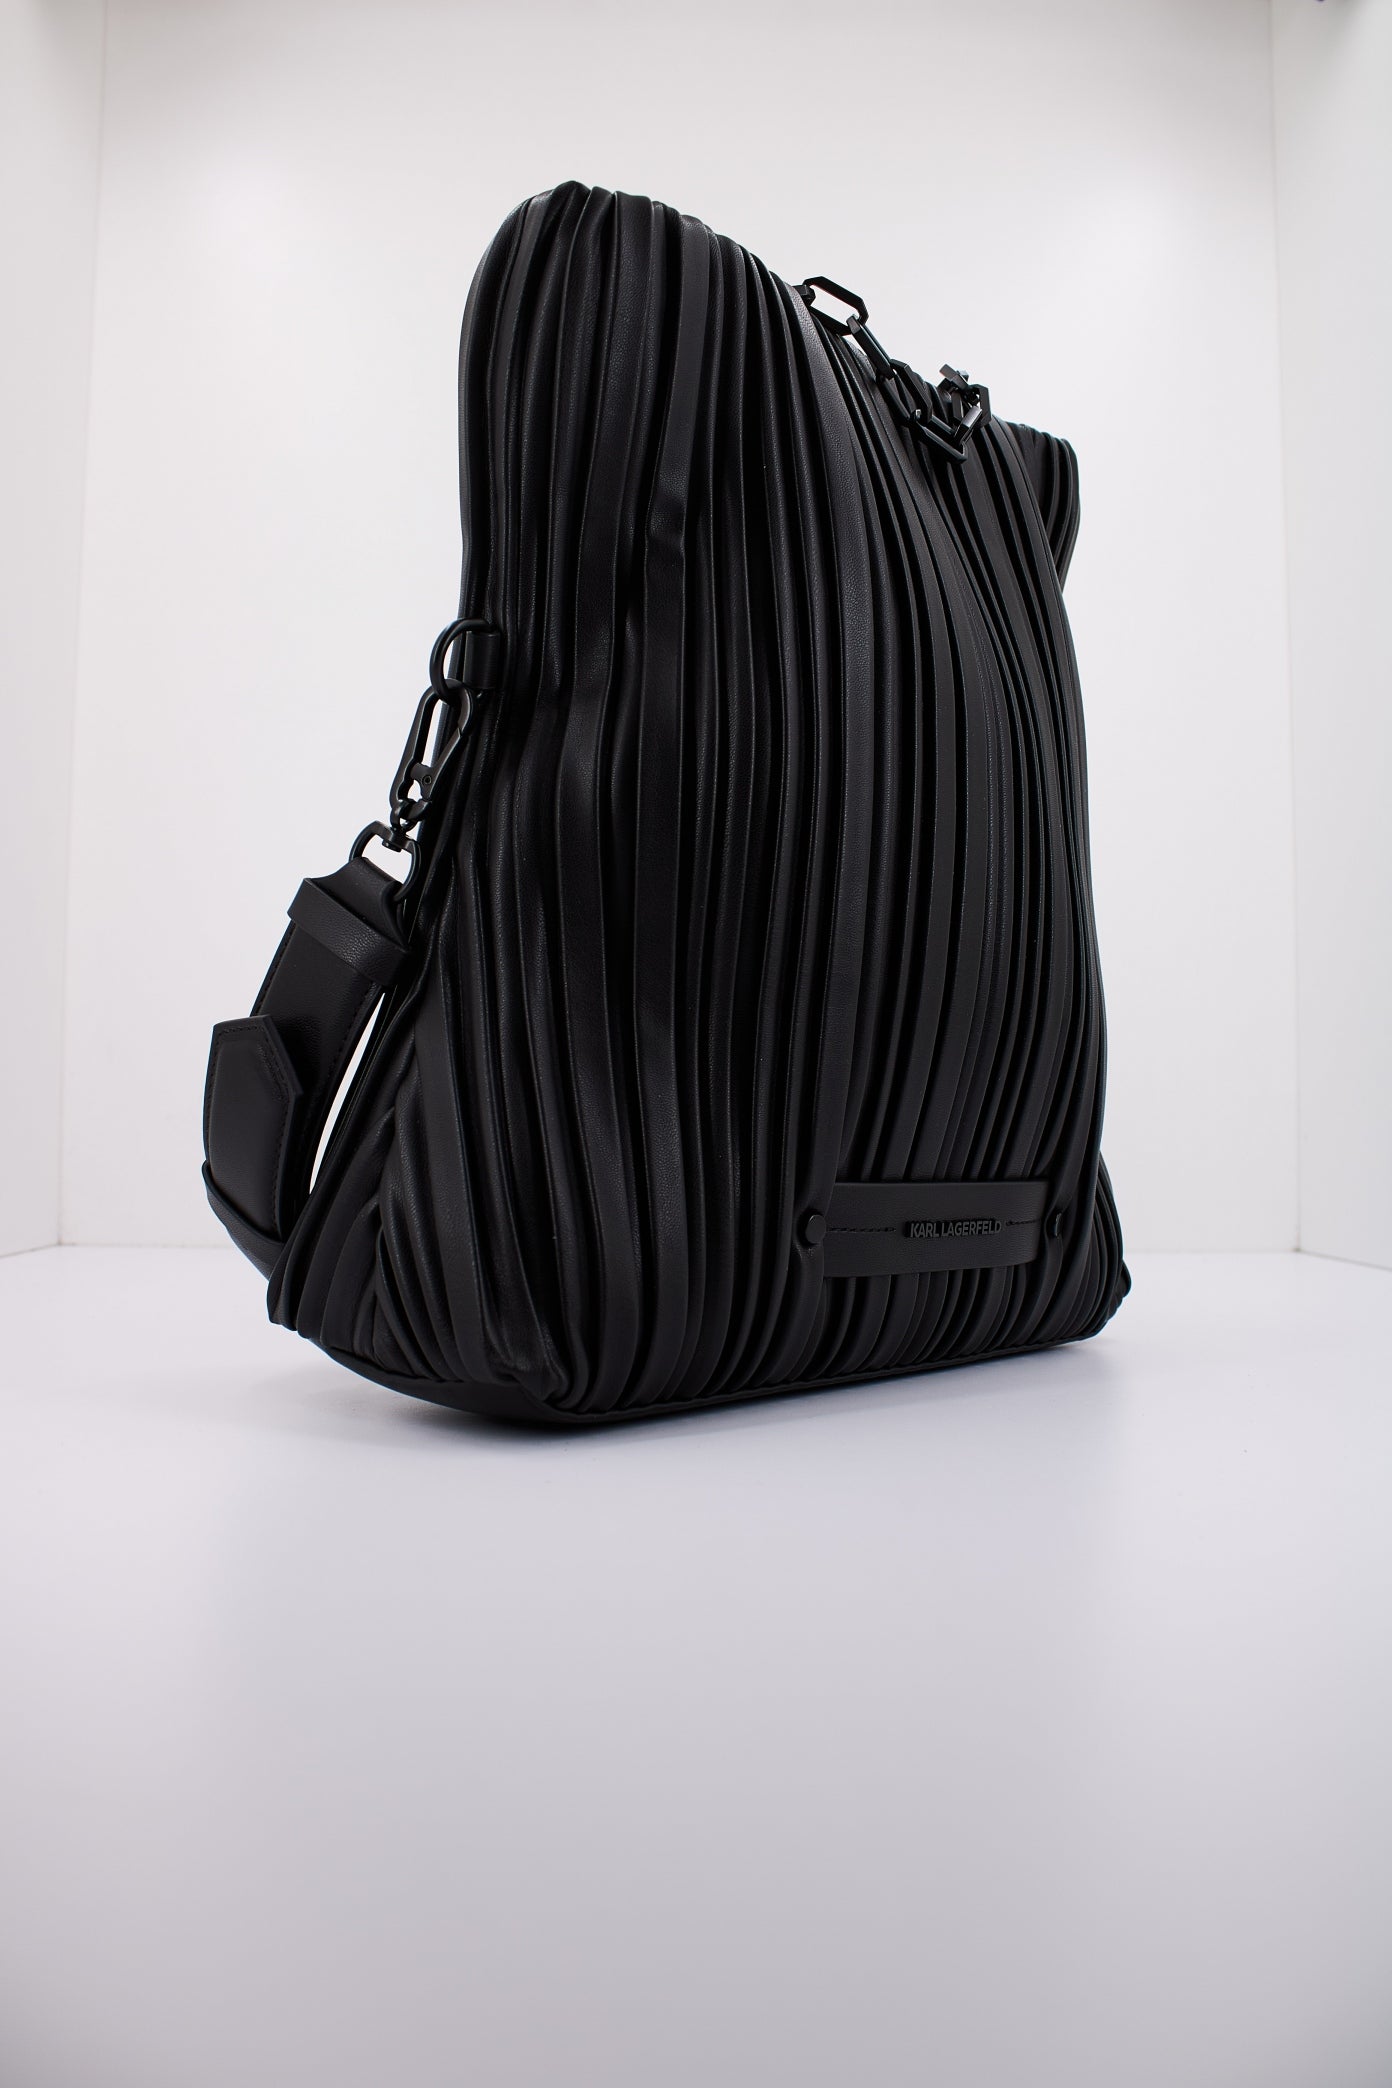 KARL LAGERFELD KUSIONS SM FOLDED TOTE en color NEGRO  (1)